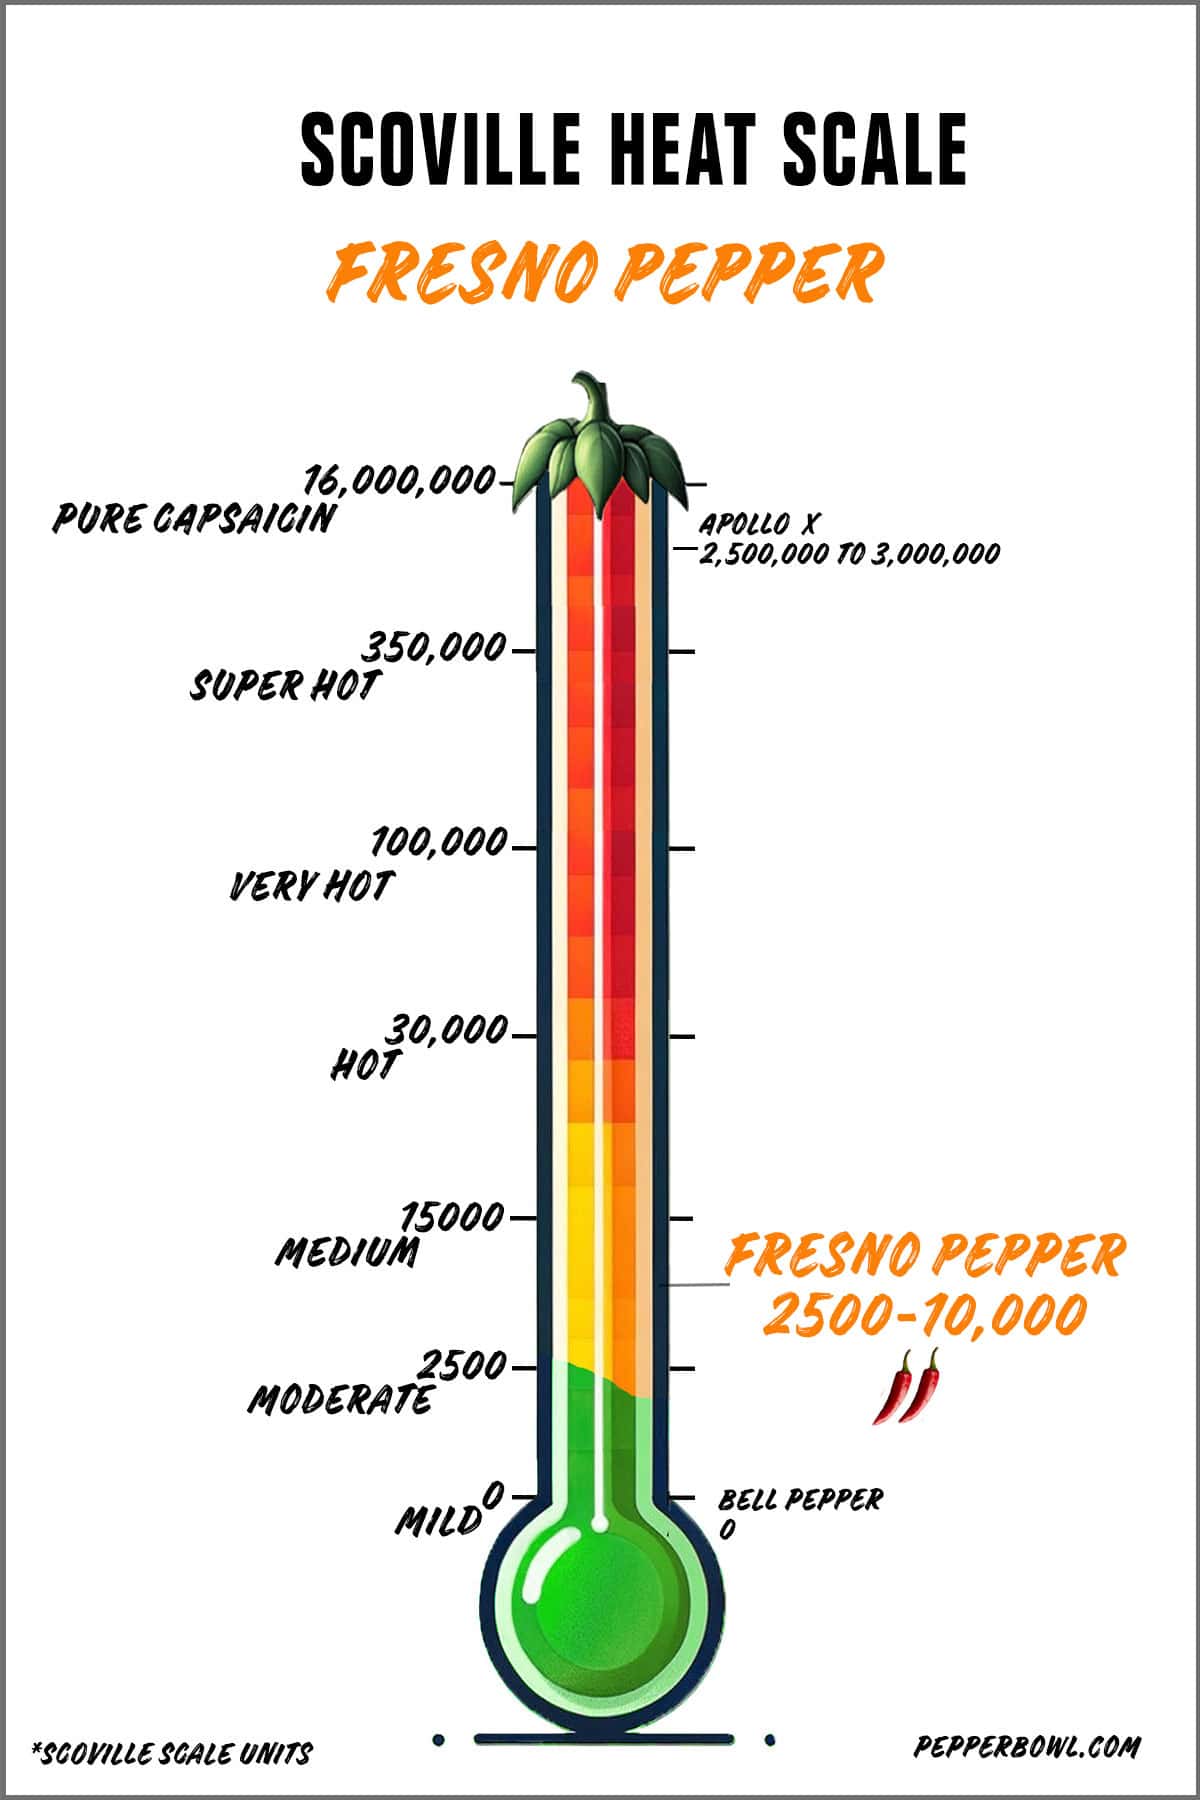 Illustration of the fresno pepper in the Scoville scale, representing its medium level of 
heat intensity.